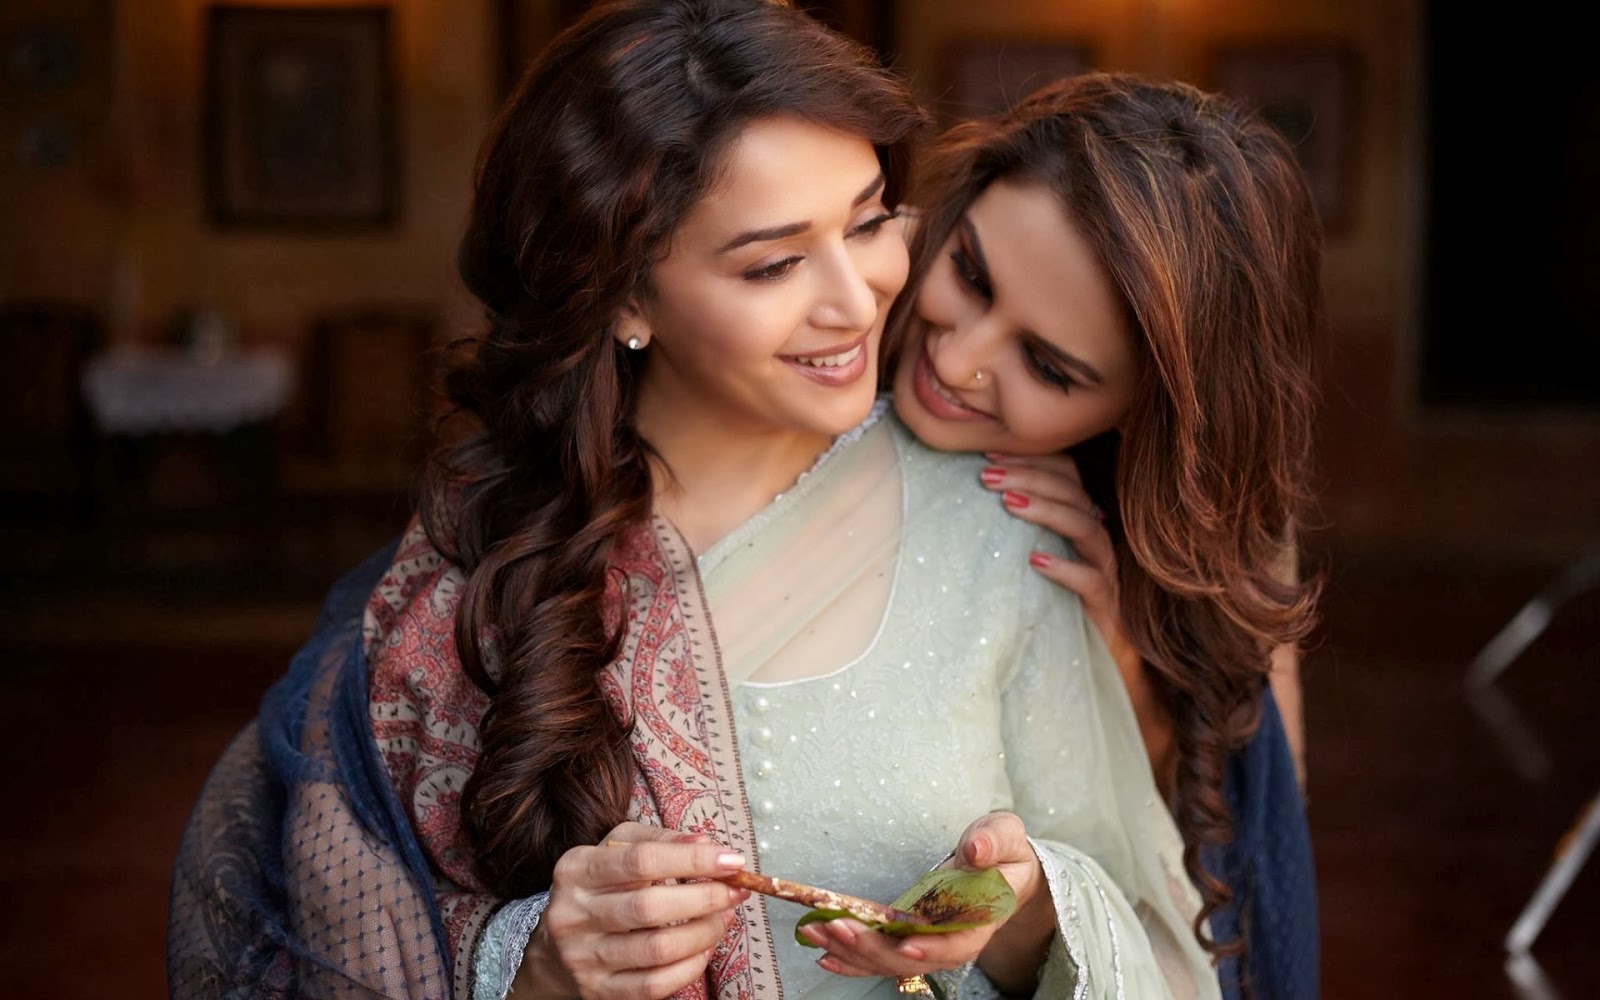 Madhuri Dixit S Dedh Ishqiya Will Release On Jan 2014 Images Archival Store